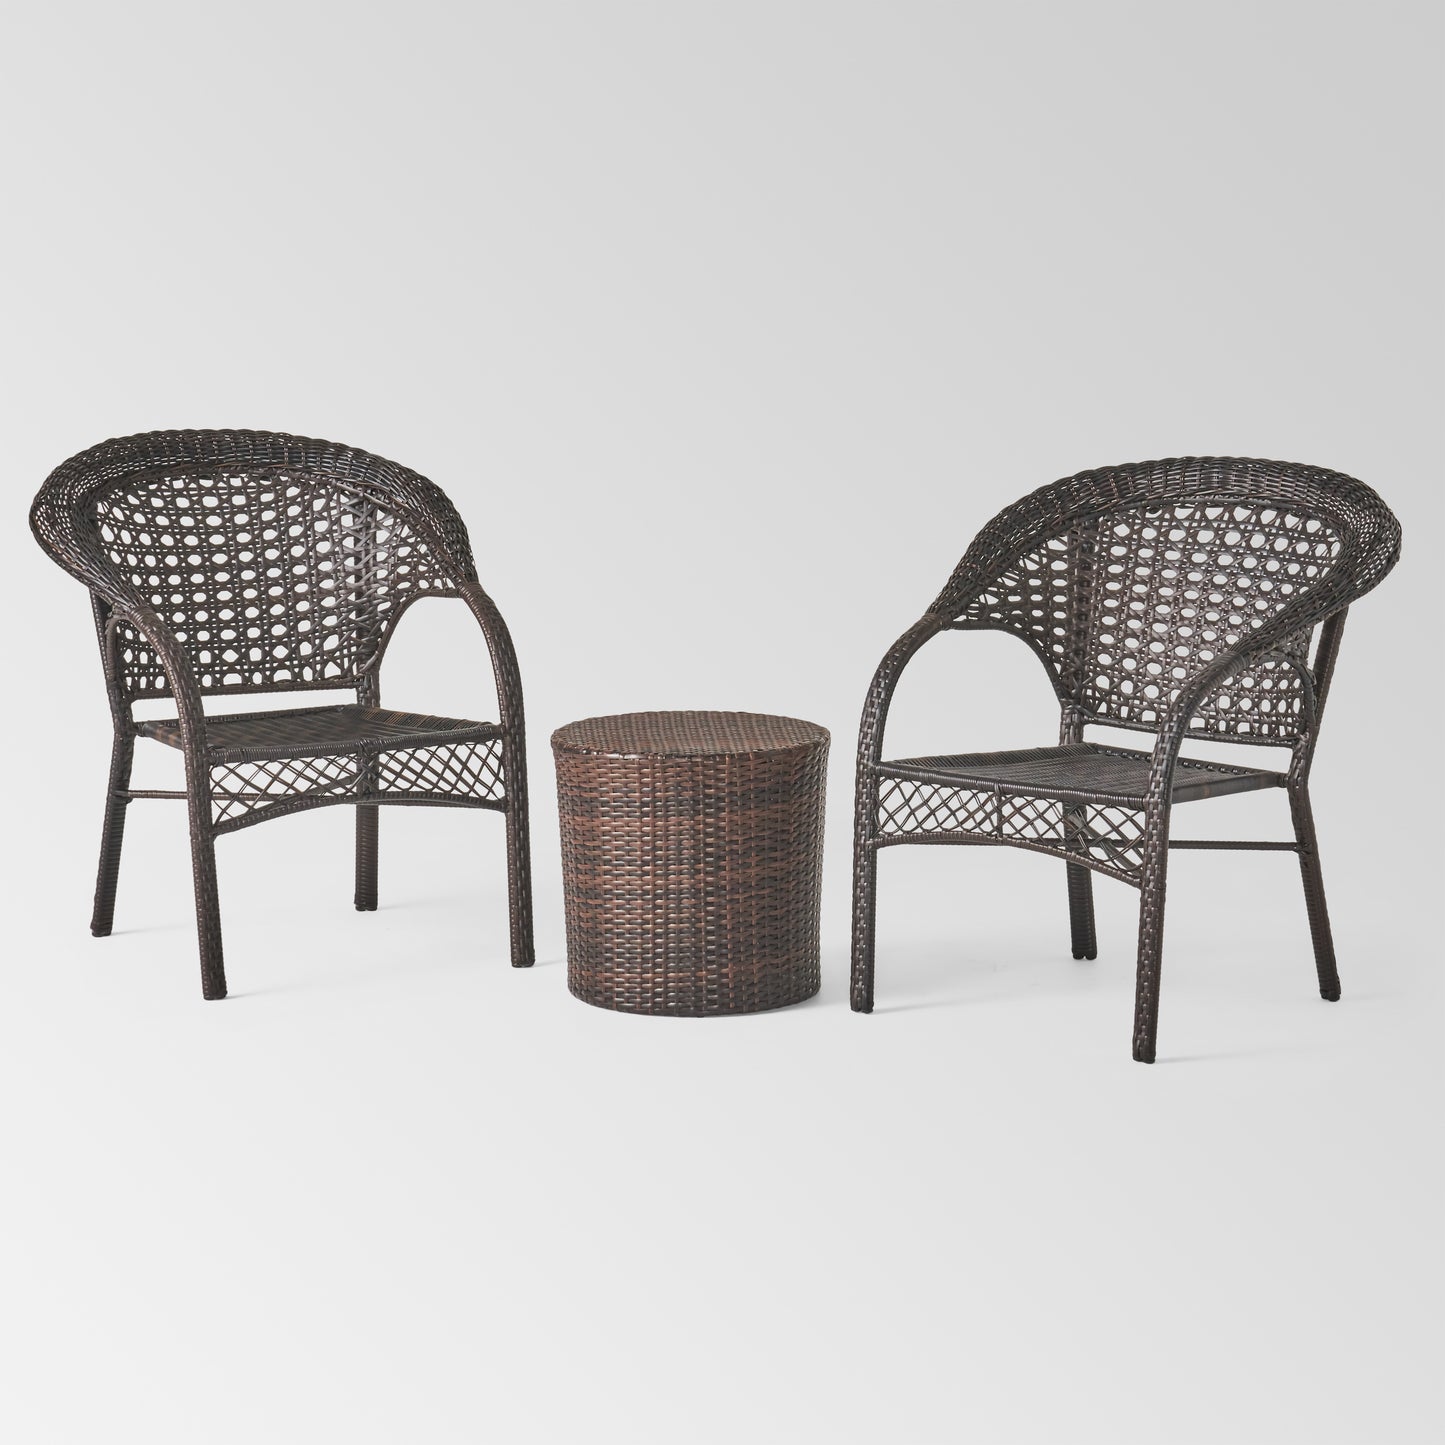 Mystic Outdoor 3 Piece Multi-brown Wicker Stacking Chair Chat Set